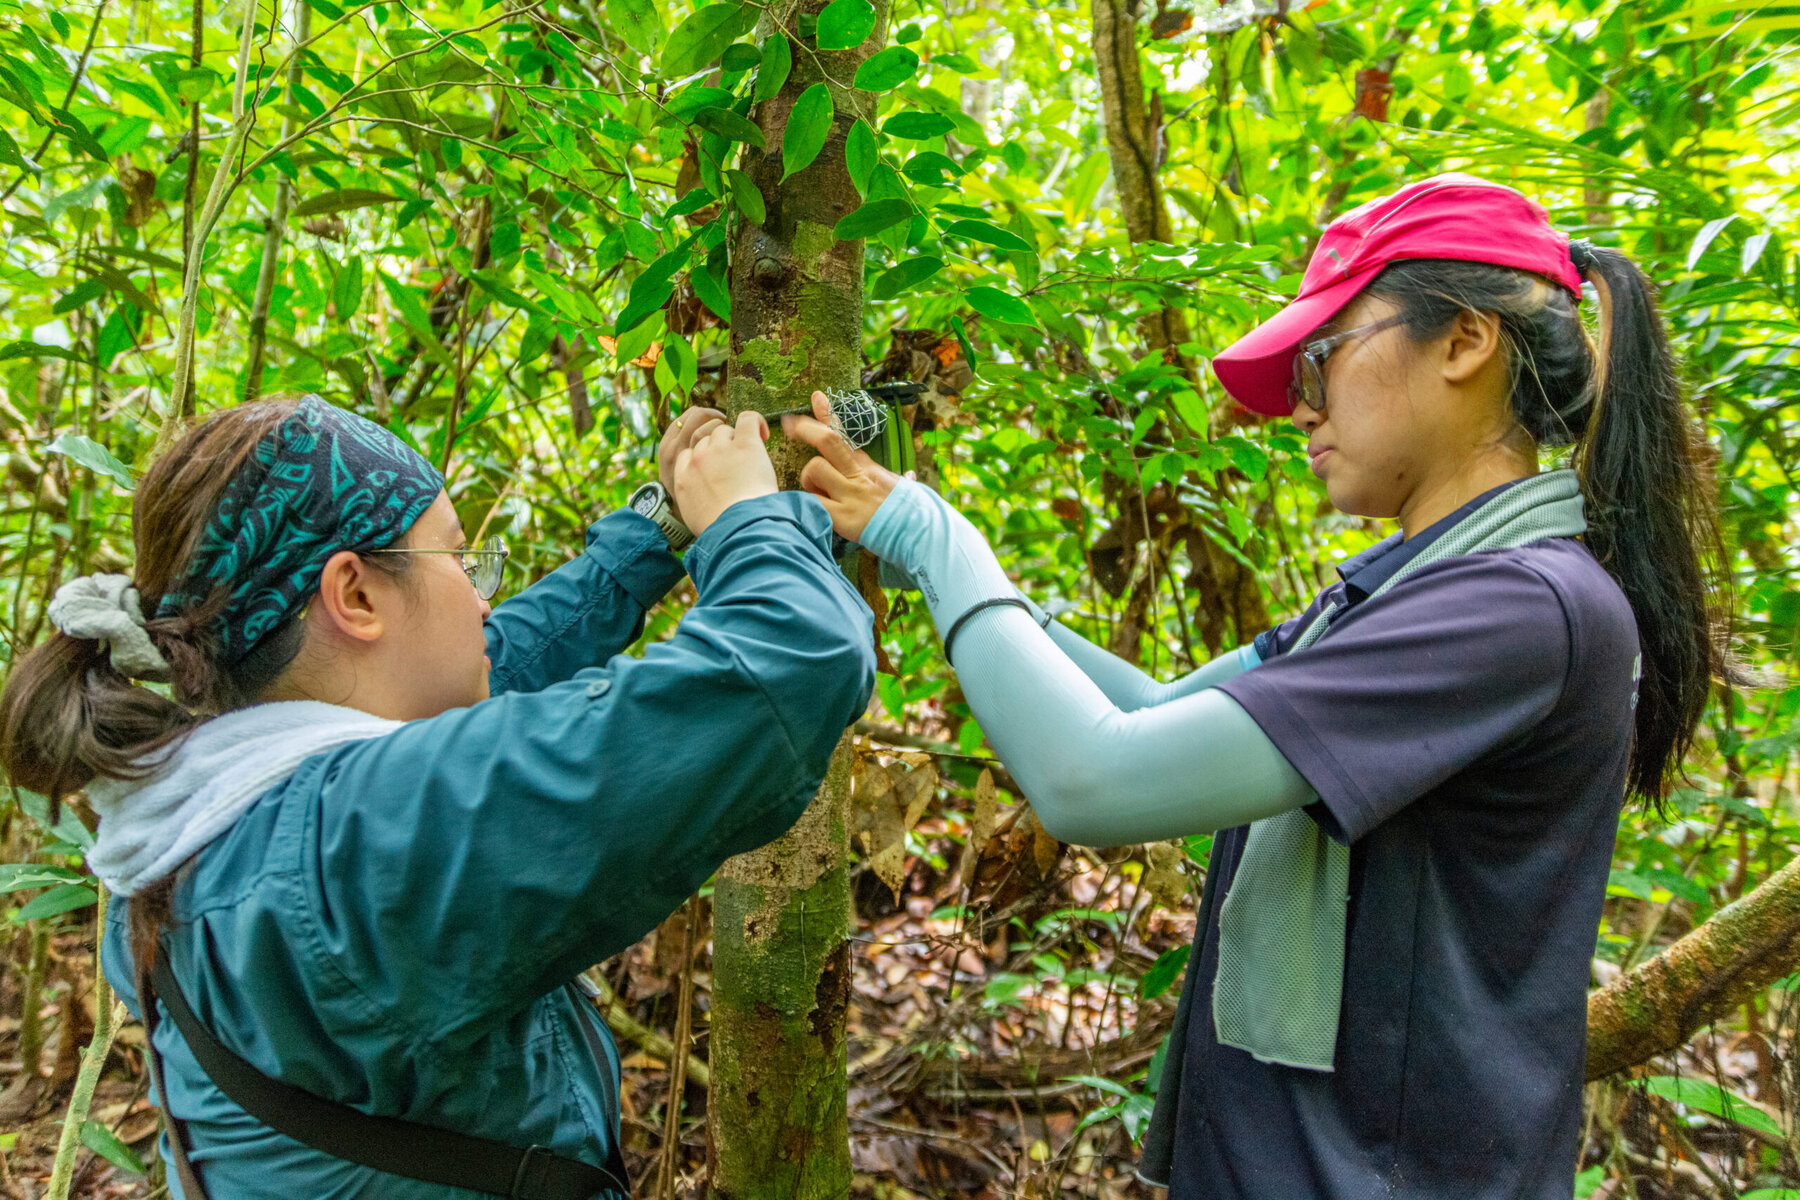 Ornithologist Dr. Loo Yen Yi and conservation biologist Lee Mei Yi at work.